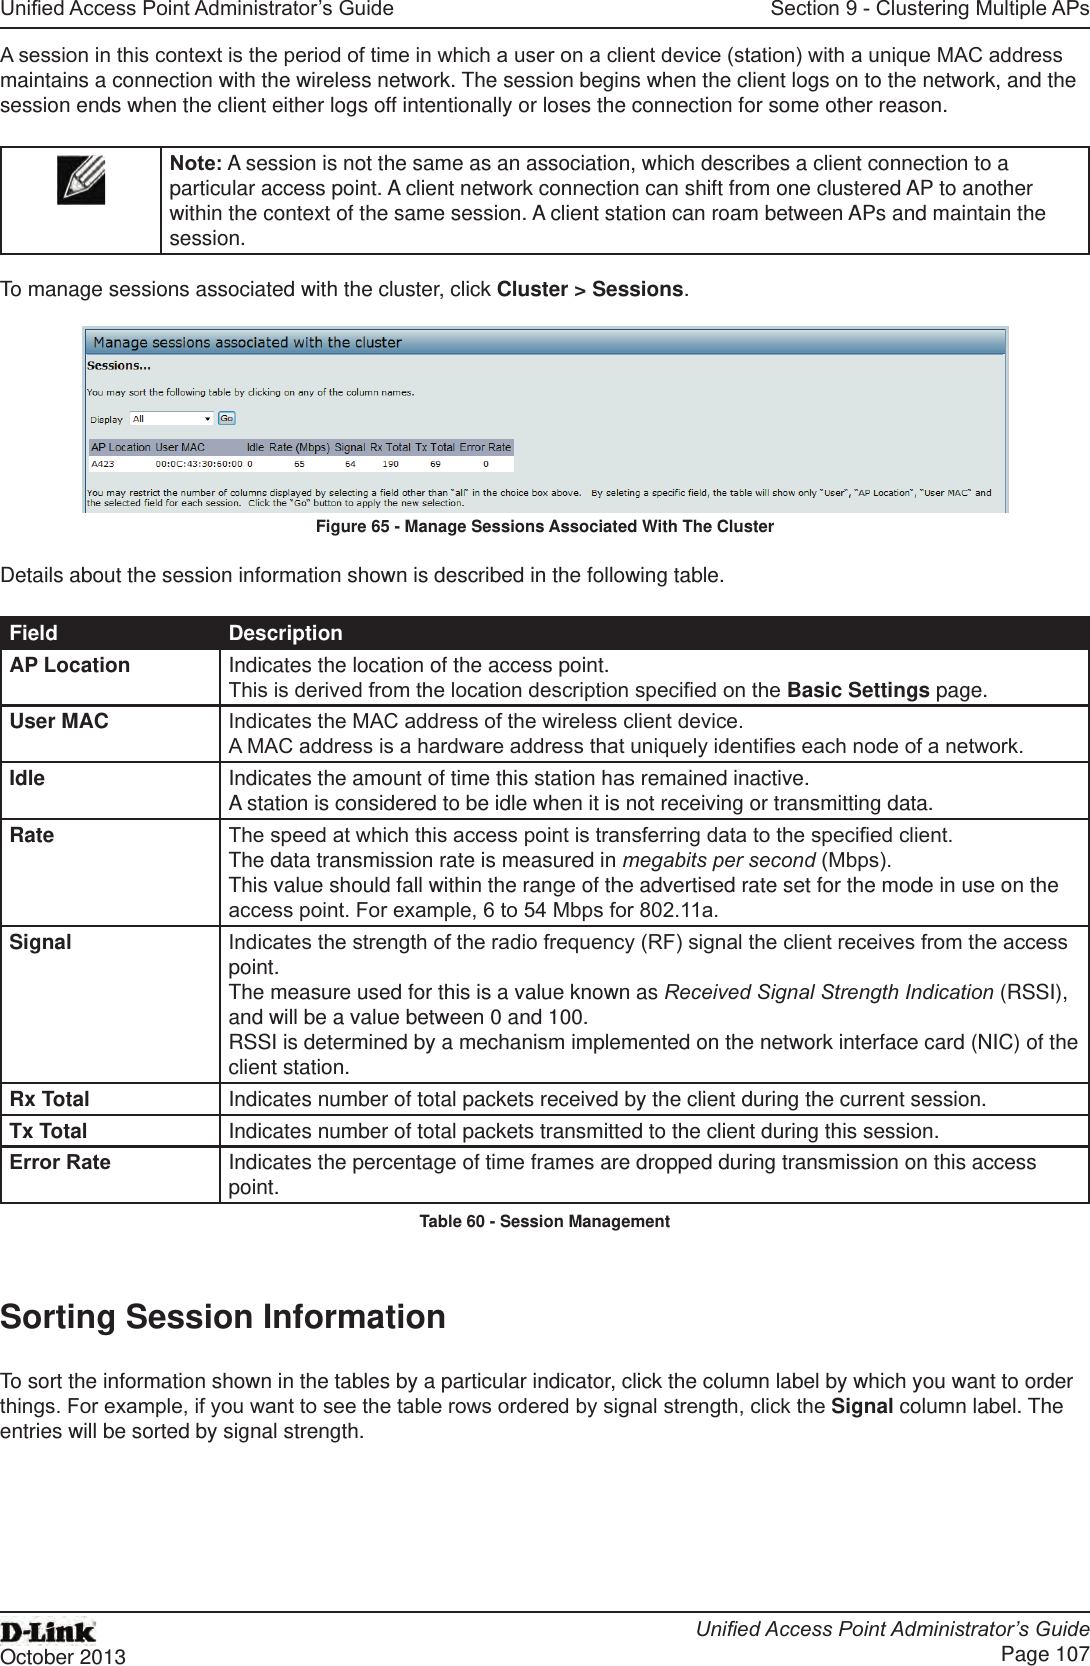 Unied Access Point Administrator’s GuideUnied Access Point Administrator’s GuidePage 107October 2013Section 9 - Clustering Multiple APsA session in this context is the period of time in which a user on a client device (station) with a unique MAC address maintains a connection with the wireless network. The session begins when the client logs on to the network, and the session ends when the client either logs off intentionally or loses the connection for some other reason.Note: A session is not the same as an association, which describes a client connection to a particular access point. A client network connection can shift from one clustered AP to another within the context of the same session. A client station can roam between APs and maintain the session.To manage sessions associated with the cluster, click Cluster &gt; Sessions.Figure 65 - Manage Sessions Associated With The ClusterDetails about the session information shown is described in the following table.Field DescriptionAP Location Indicates the location of the access point.This is derived from the location description specied on the Basic Settings page.User MAC Indicates the MAC address of the wireless client device.A MAC address is a hardware address that uniquely identies each node of a network.Idle Indicates the amount of time this station has remained inactive.A station is considered to be idle when it is not receiving or transmitting data.Rate The speed at which this access point is transferring data to the specied client.The data transmission rate is measured in megabits per second (Mbps).This value should fall within the range of the advertised rate set for the mode in use on the access point. For example, 6 to 54 Mbps for 802.11a.Signal Indicates the strength of the radio frequency (RF) signal the client receives from the access point.The measure used for this is a value known as Received Signal Strength Indication (RSSI), and will be a value between 0 and 100.RSSI is determined by a mechanism implemented on the network interface card (NIC) of the client station.Rx Total Indicates number of total packets received by the client during the current session.Tx Total Indicates number of total packets transmitted to the client during this session.Error Rate Indicates the percentage of time frames are dropped during transmission on this access point.Table 60 - Session ManagementSorting Session InformationTo sort the information shown in the tables by a particular indicator, click the column label by which you want to order things. For example, if you want to see the table rows ordered by signal strength, click the Signal column label. The entries will be sorted by signal strength.